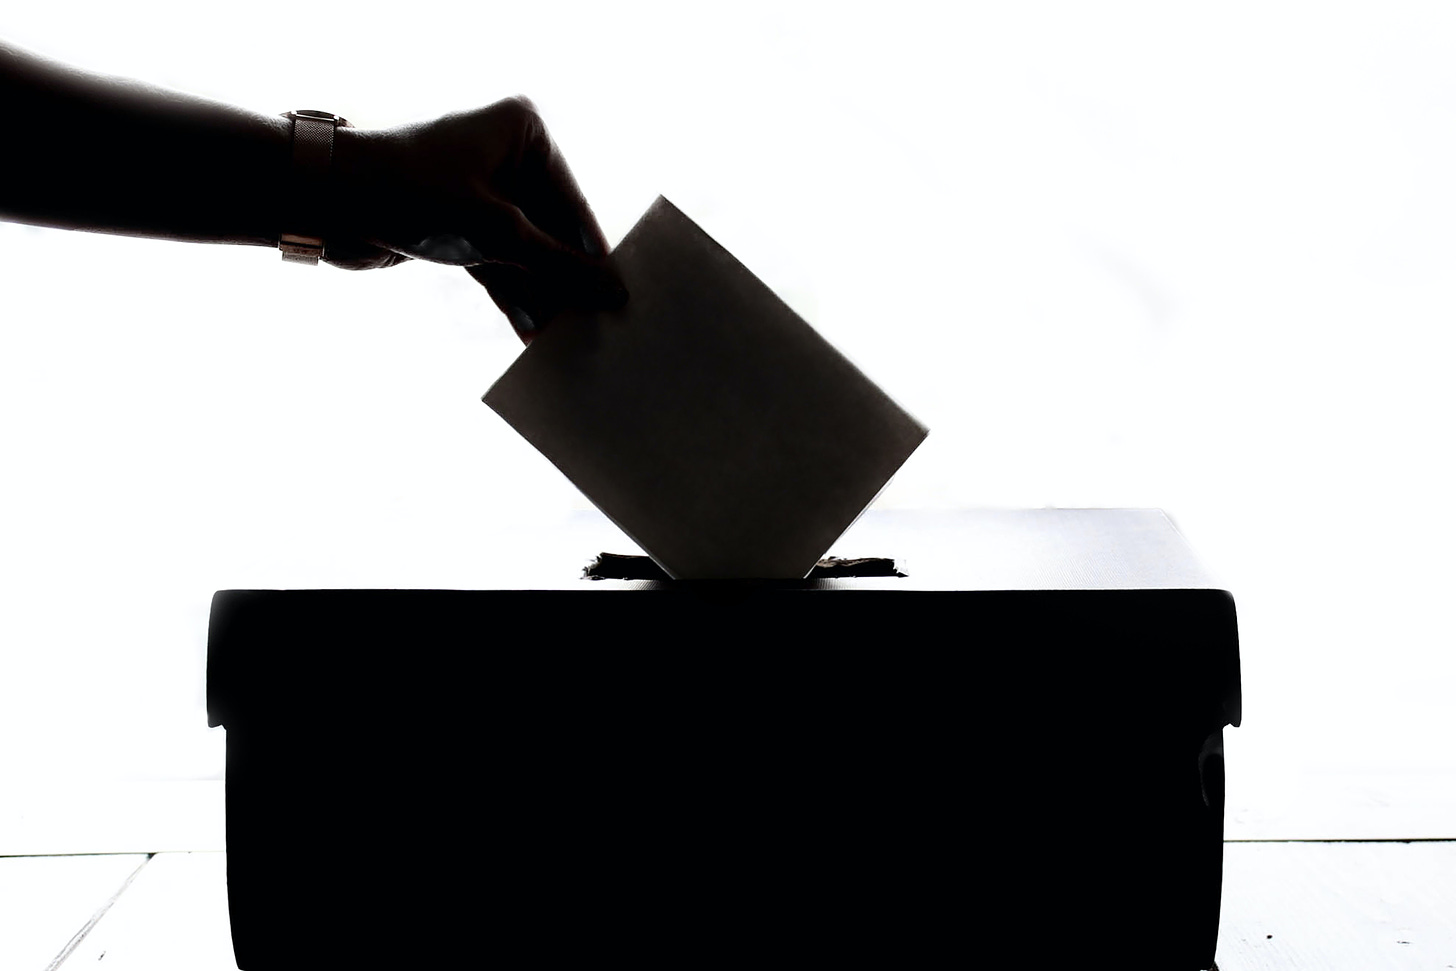 The silhouette of a hand dropping a vote into a ballot box.